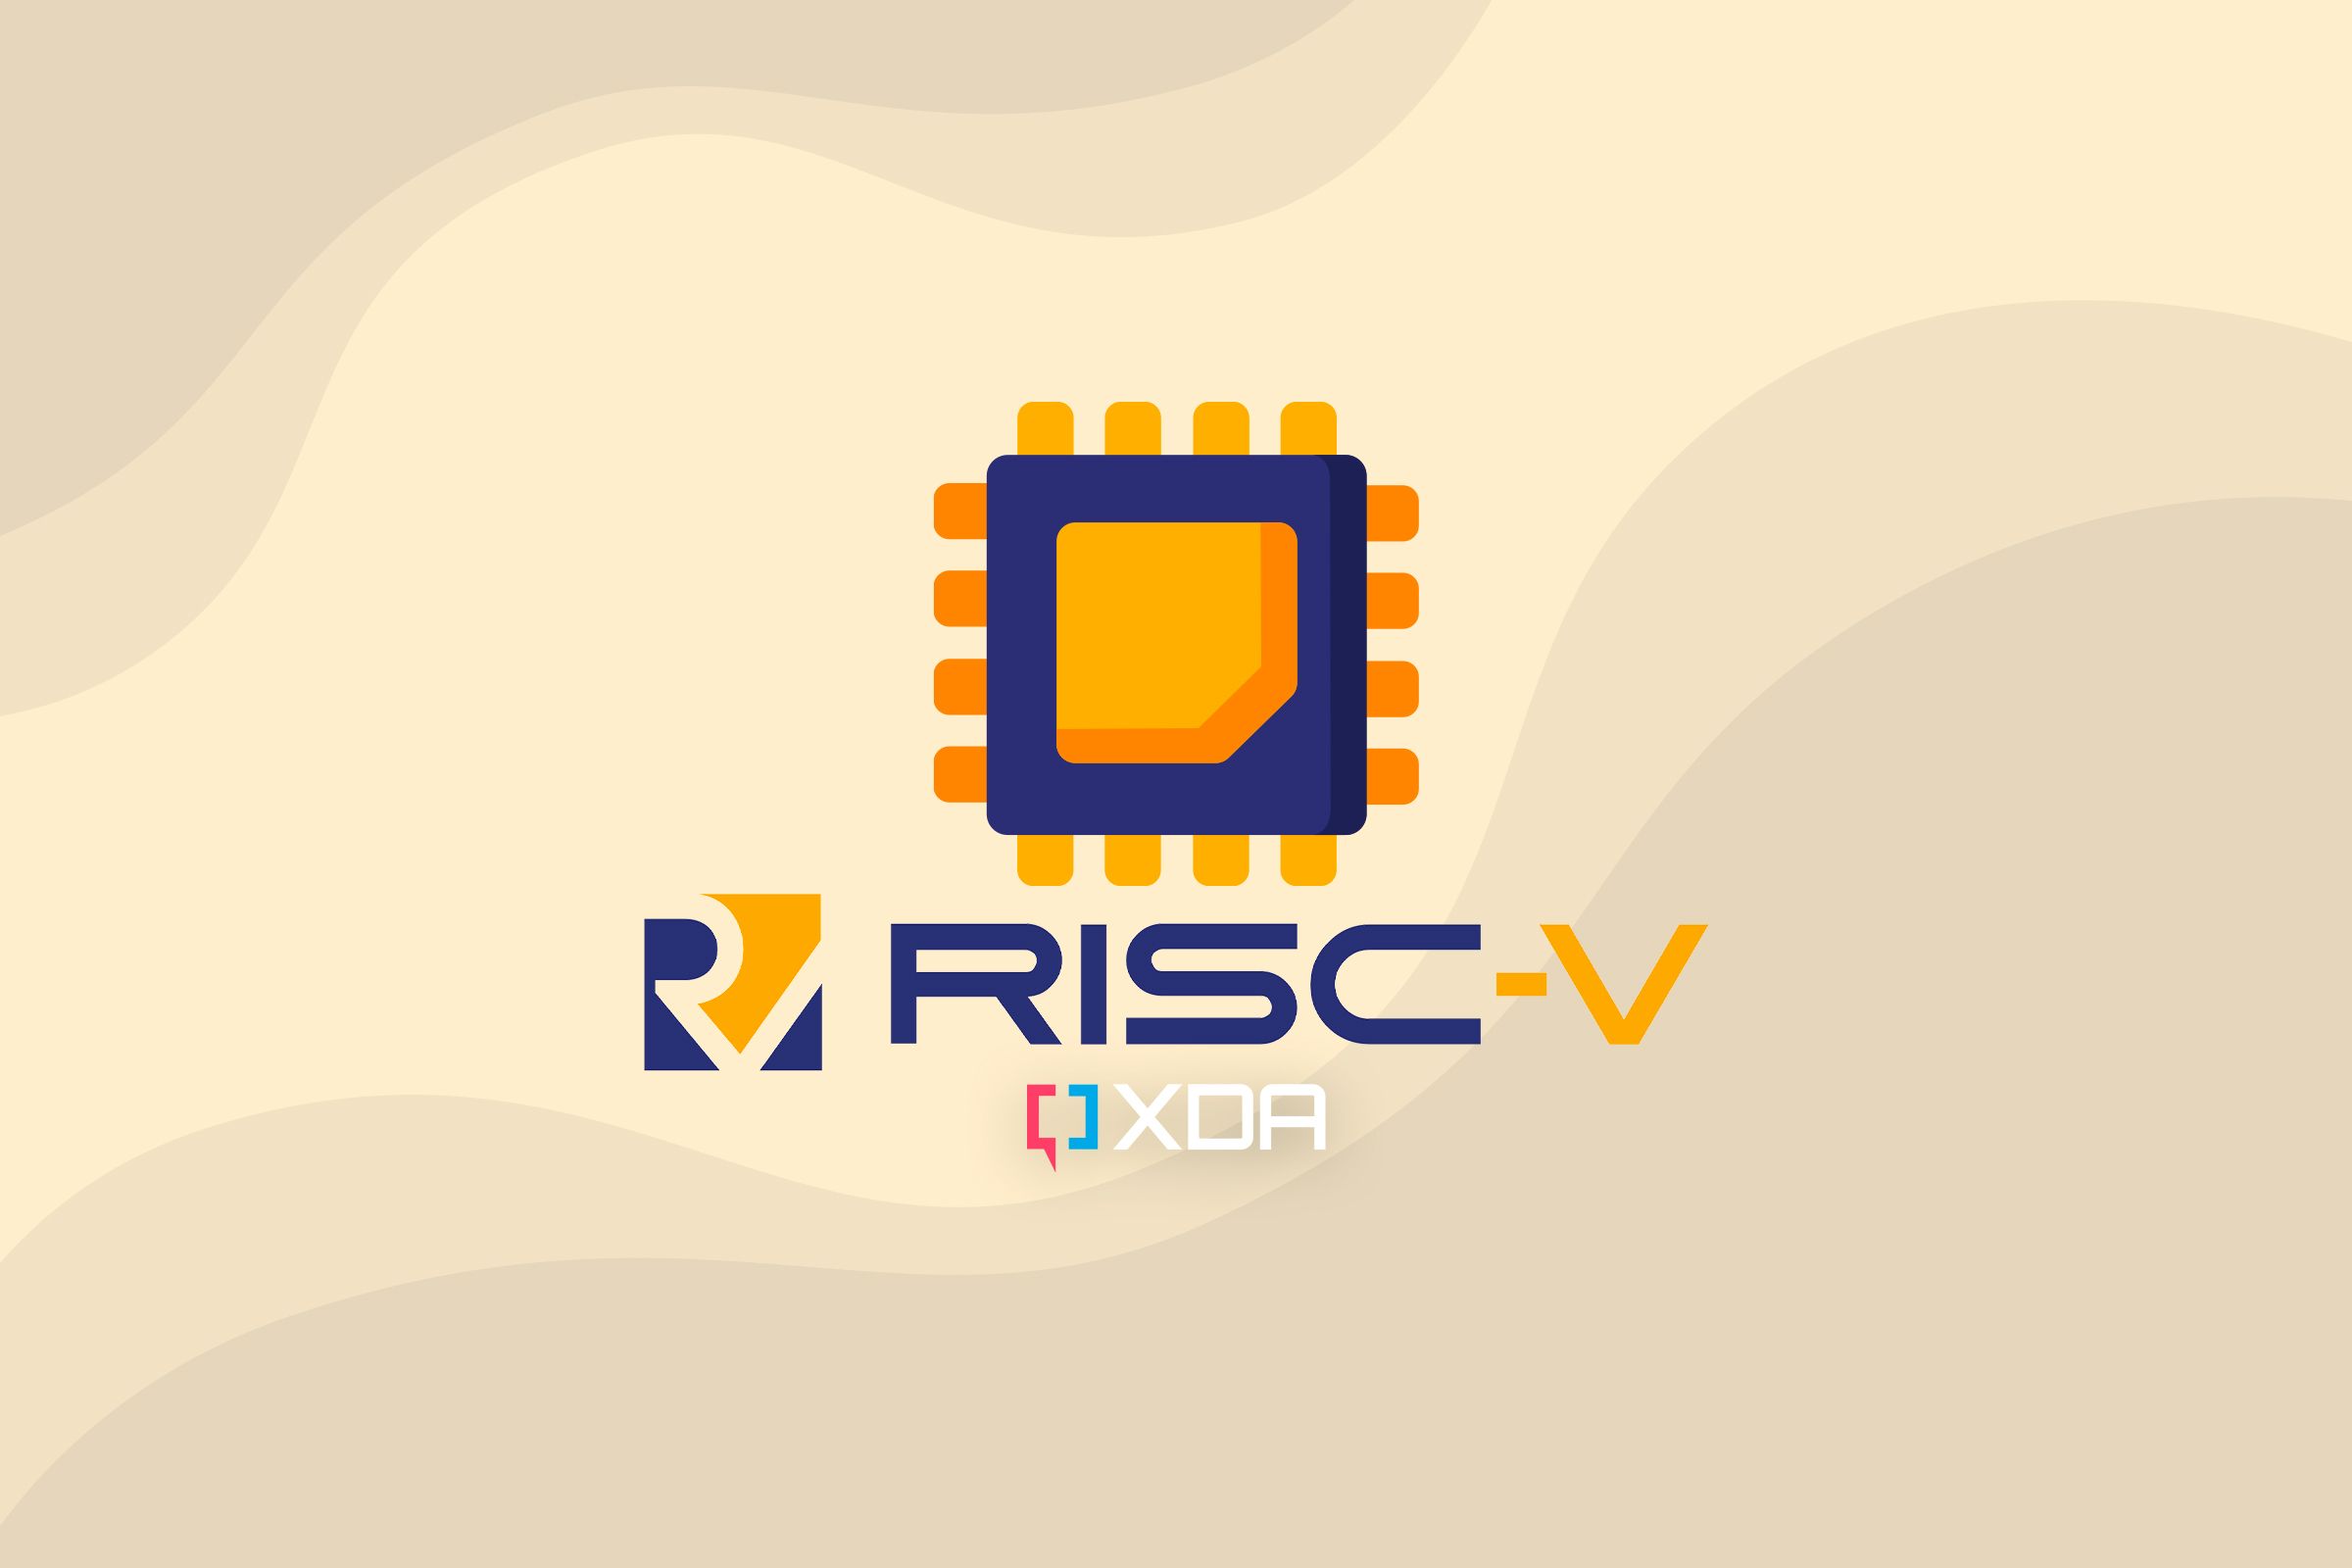 Why RISC-V is so important